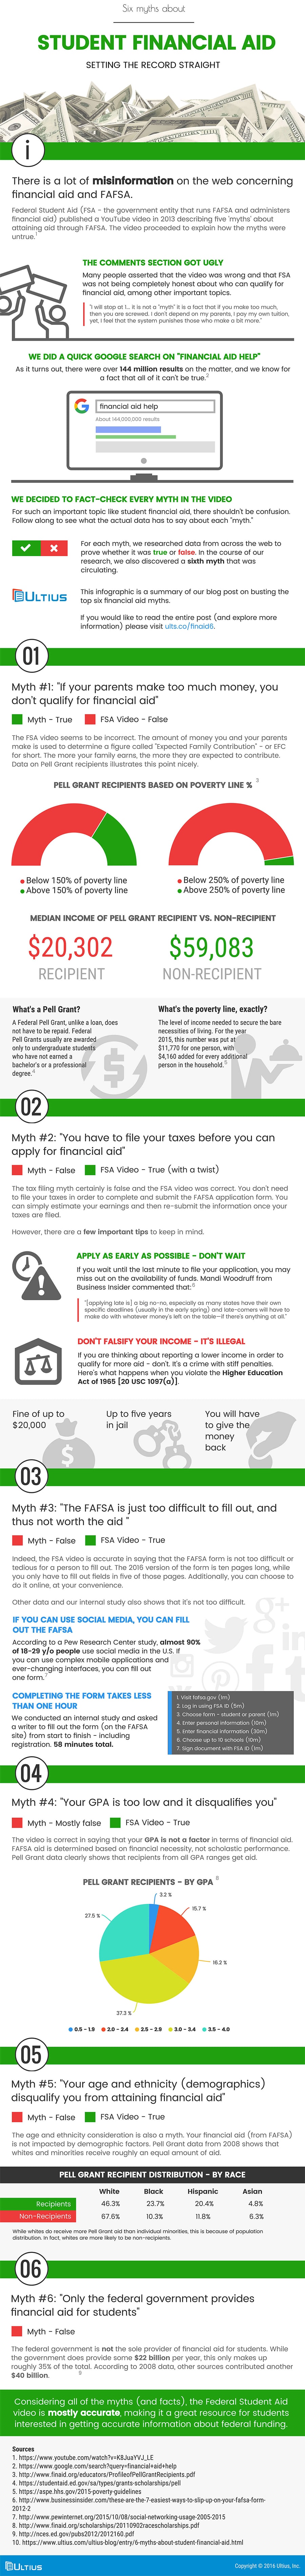 6 Myths About Student Financial Aid - An Infographic